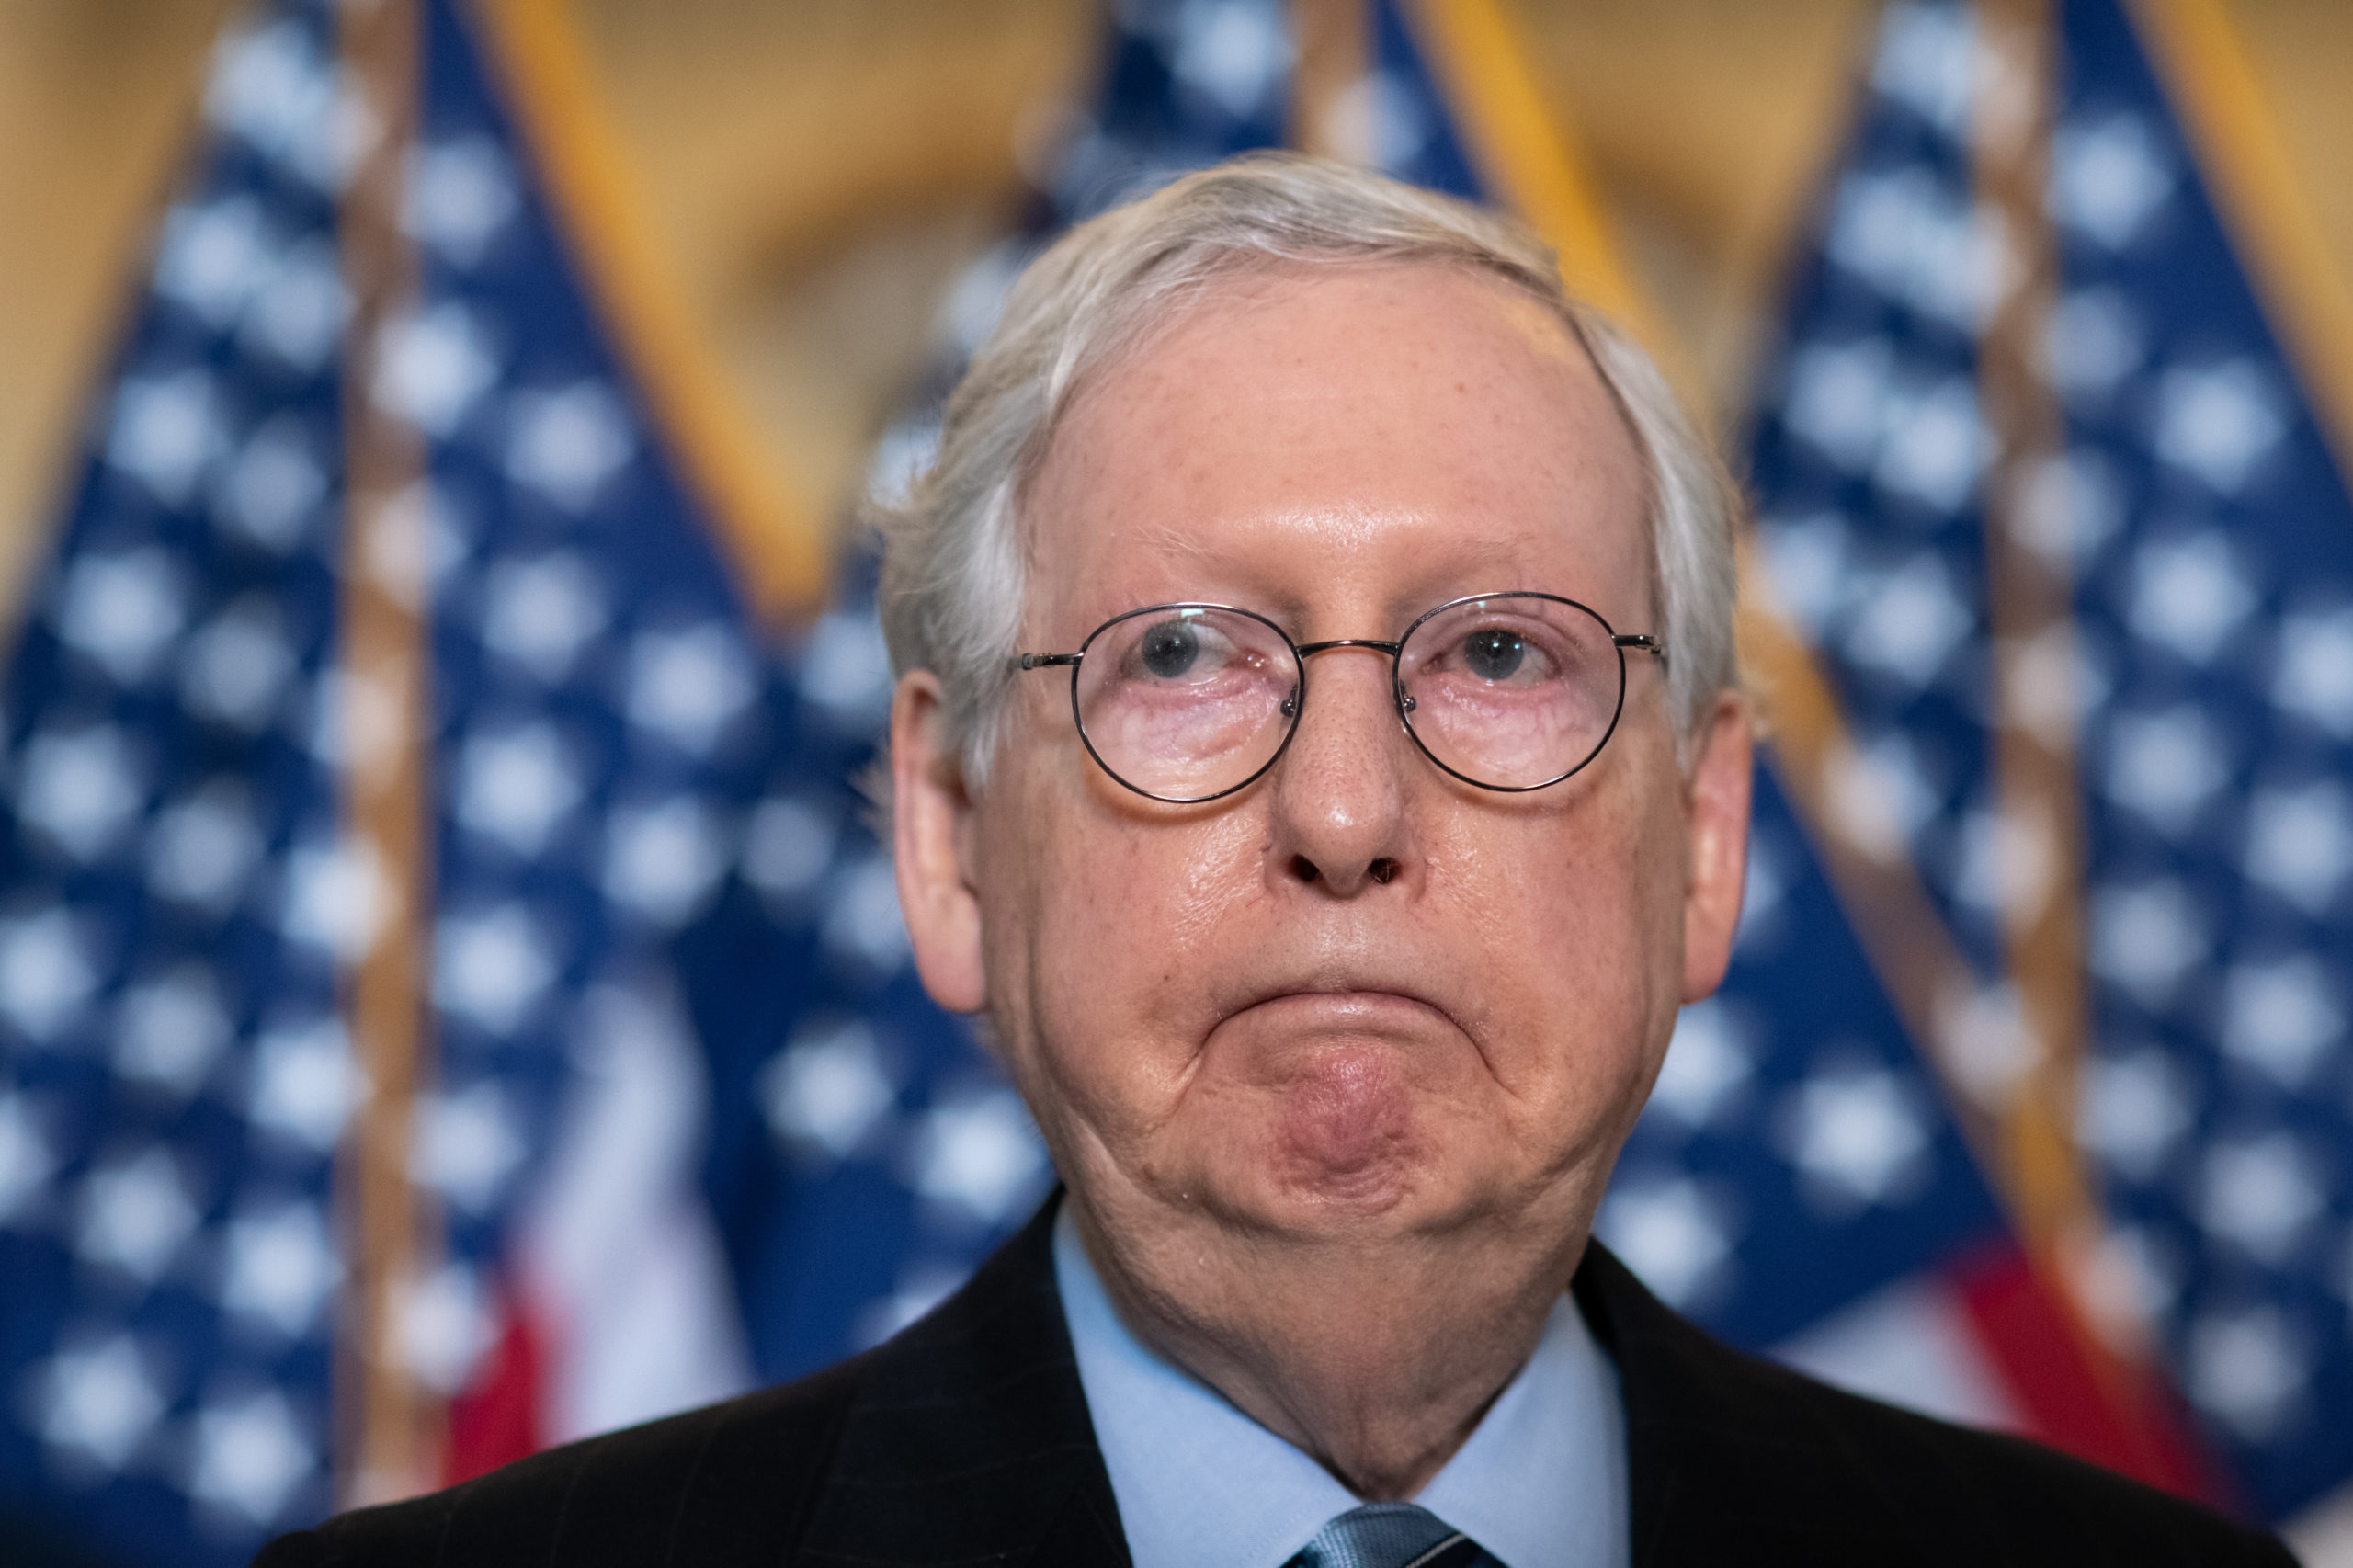 Mitch McConnell Says Voter Suppression Doesn't Exist in Any US State